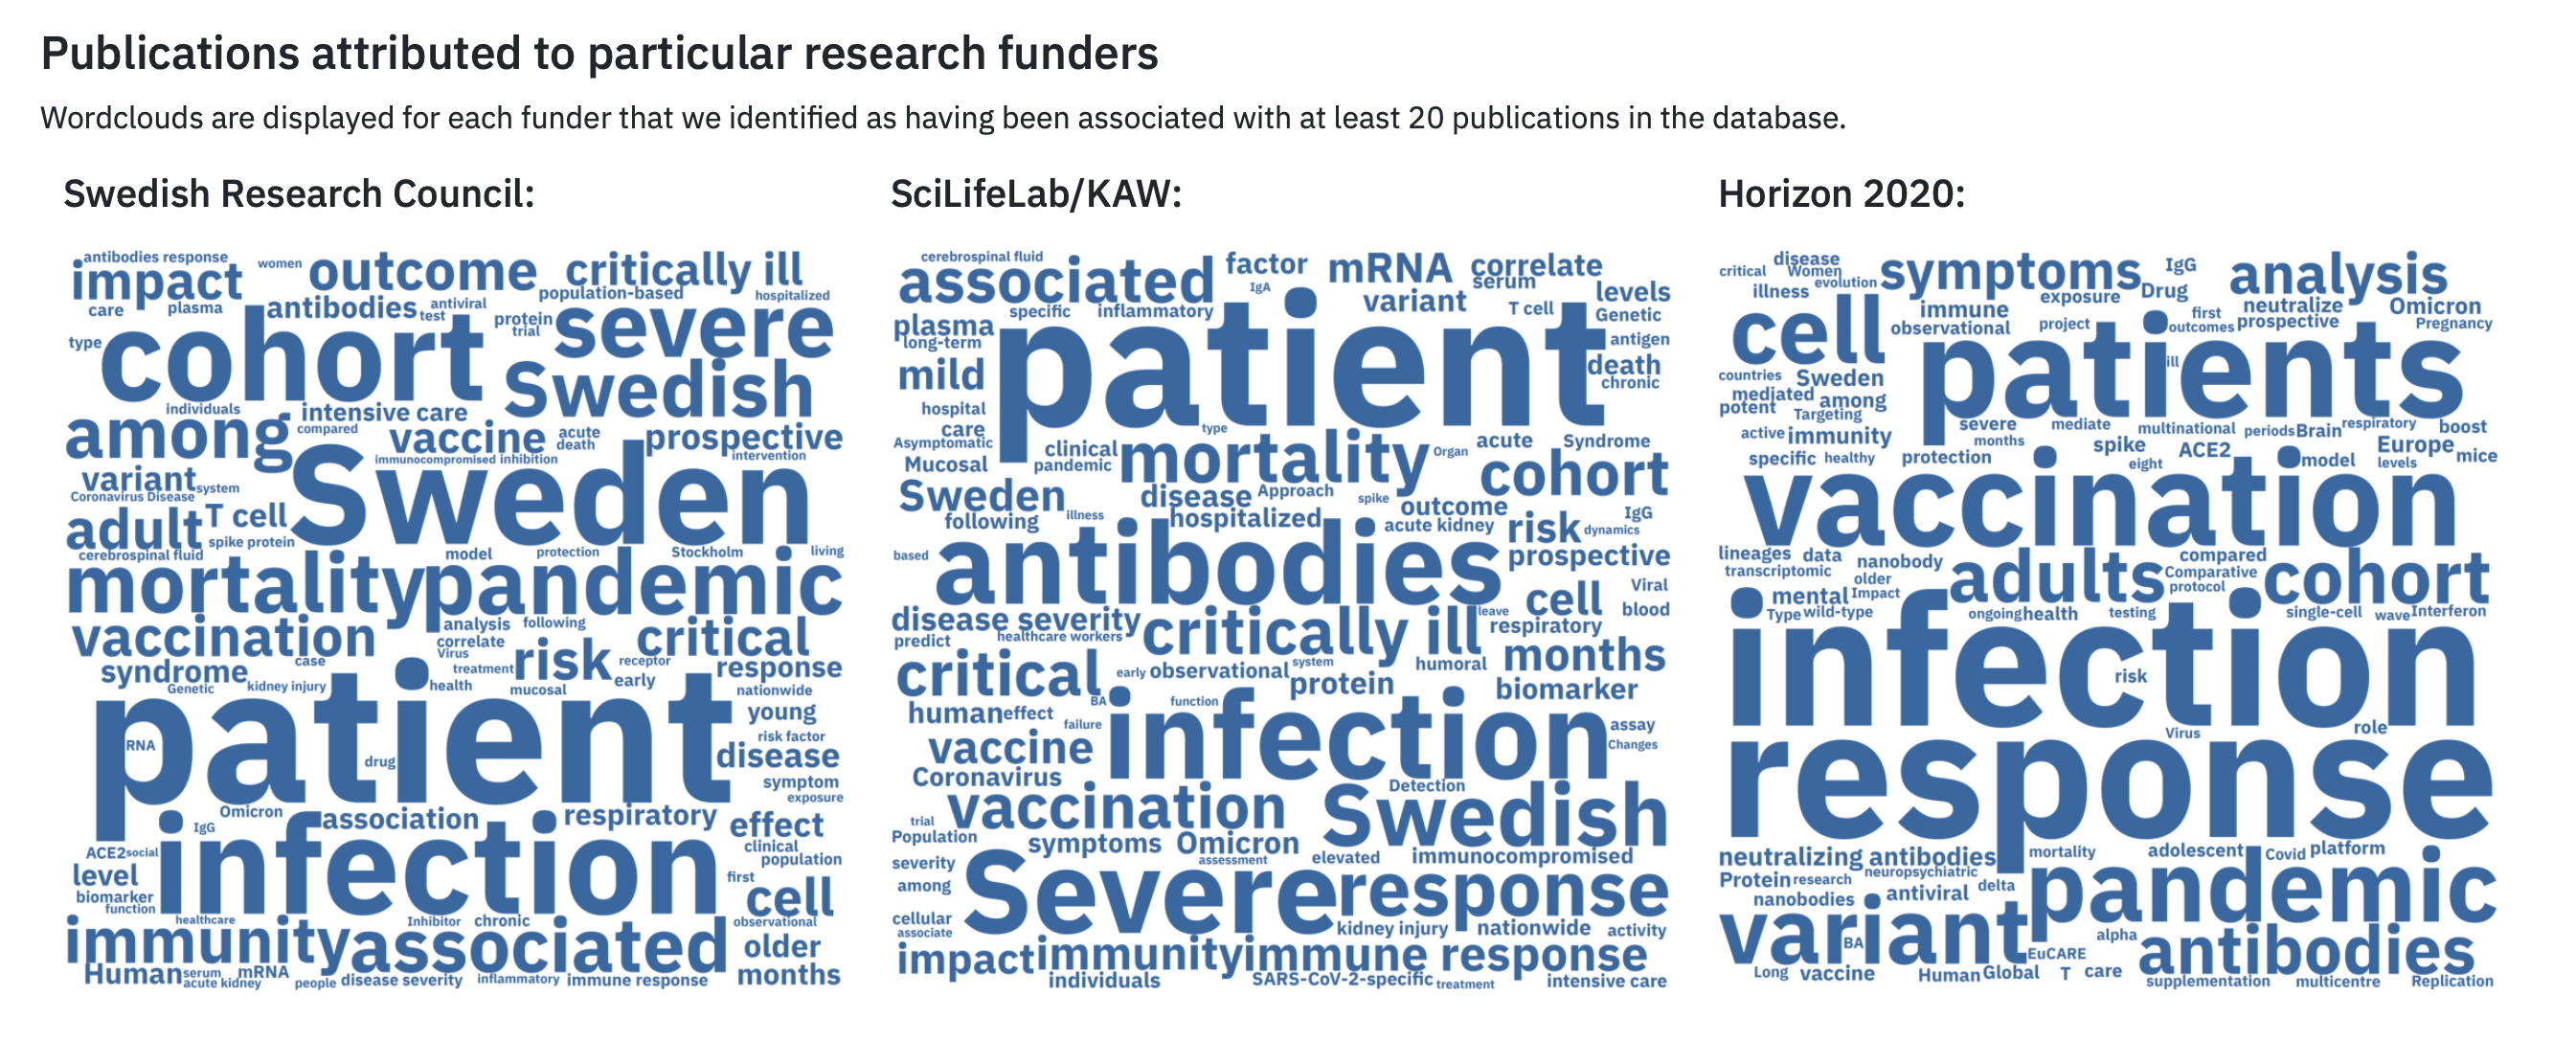 Word clouds from The Swedish Pathogens Portal showing the words most commonly used in abstracts from COVID-19 publications from different funders, with more common words being larger